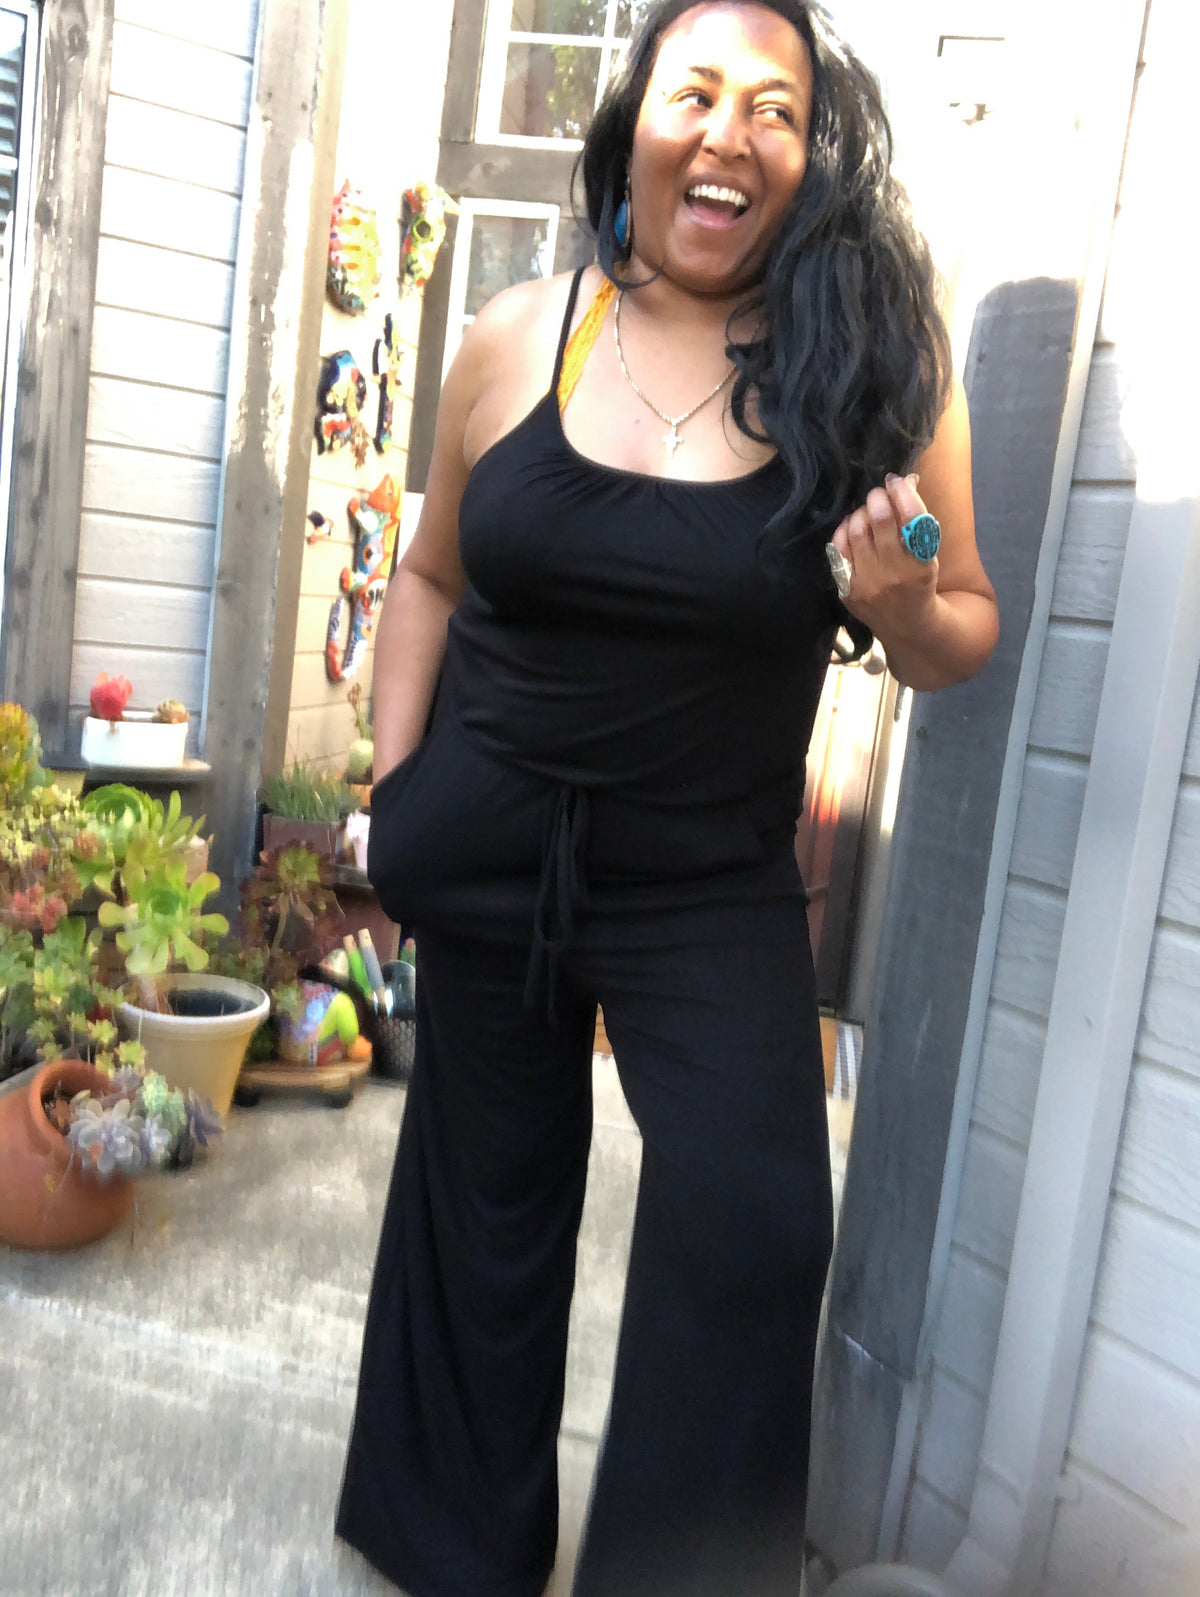 Tank Style Jumpsuit Regular and Plus Sizes